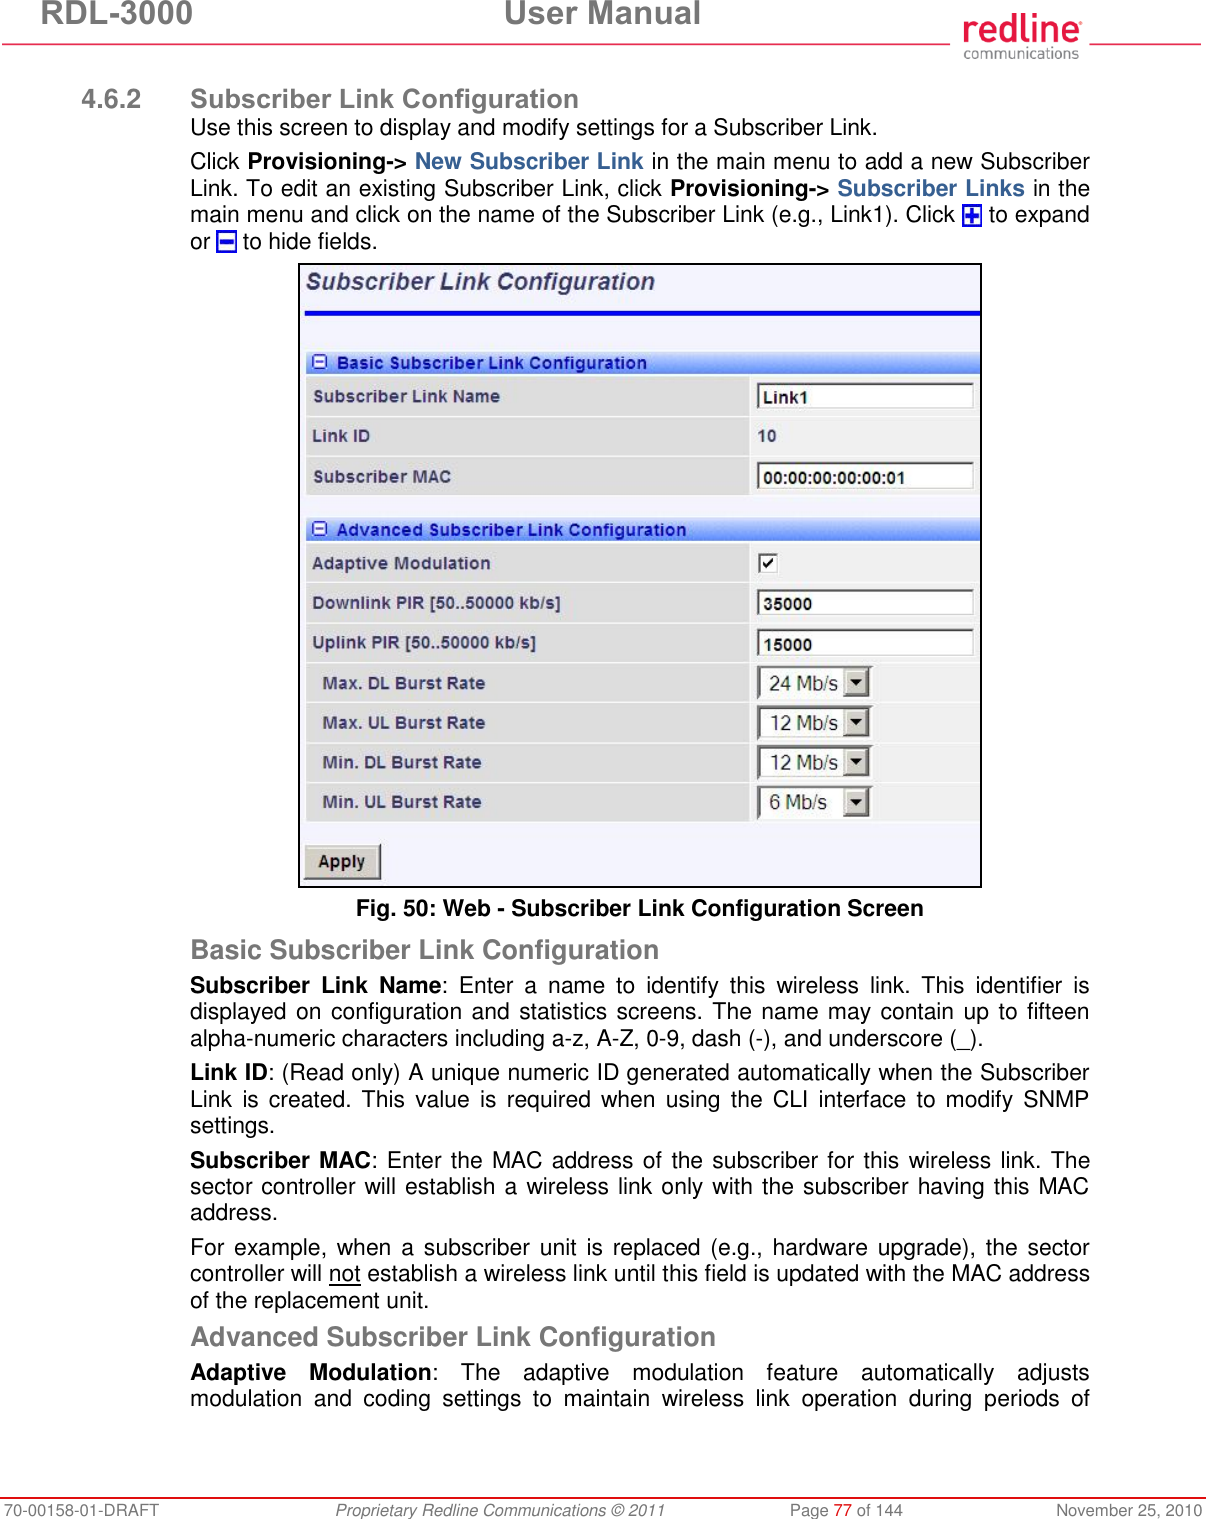 RDL-3000  User Manual 70-00158-01-DRAFT  Proprietary Redline Communications © 2011  Page 77 of 144  November 25, 2010  4.6.2 Subscriber Link Configuration Use this screen to display and modify settings for a Subscriber Link. Click Provisioning-&gt; New Subscriber Link in the main menu to add a new Subscriber Link. To edit an existing Subscriber Link, click Provisioning-&gt; Subscriber Links in the main menu and click on the name of the Subscriber Link (e.g., Link1). Click   to expand or   to hide fields.  Fig. 50: Web - Subscriber Link Configuration Screen Basic Subscriber Link Configuration Subscriber  Link  Name:  Enter  a  name  to  identify  this  wireless  link.  This  identifier  is displayed on configuration and statistics screens. The name may contain up to fifteen alpha-numeric characters including a-z, A-Z, 0-9, dash (-), and underscore (_). Link ID: (Read only) A unique numeric ID generated automatically when the Subscriber Link  is created. This  value is  required when using  the  CLI  interface  to modify  SNMP settings. Subscriber MAC: Enter the MAC address of the subscriber for this  wireless link. The sector controller will establish a wireless link only with the subscriber having this MAC address. For example, when a subscriber unit is replaced (e.g.,  hardware upgrade), the sector controller will not establish a wireless link until this field is updated with the MAC address of the replacement unit. Advanced Subscriber Link Configuration Adaptive  Modulation:  The  adaptive  modulation  feature  automatically  adjusts modulation  and  coding  settings  to  maintain  wireless  link  operation  during  periods  of 